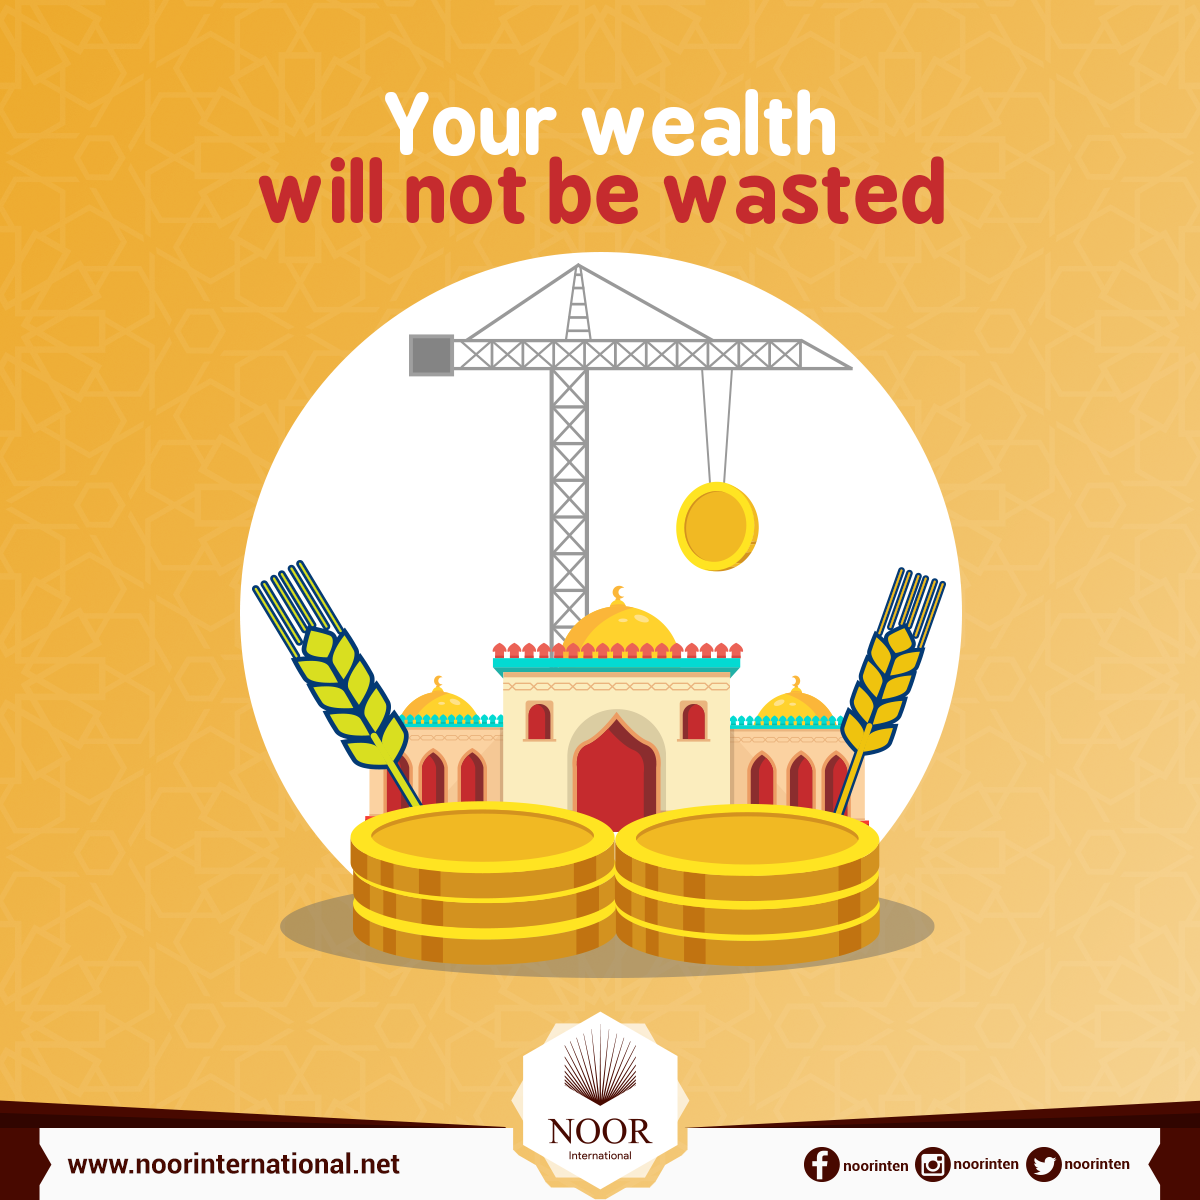 Your wealth will not be wasted